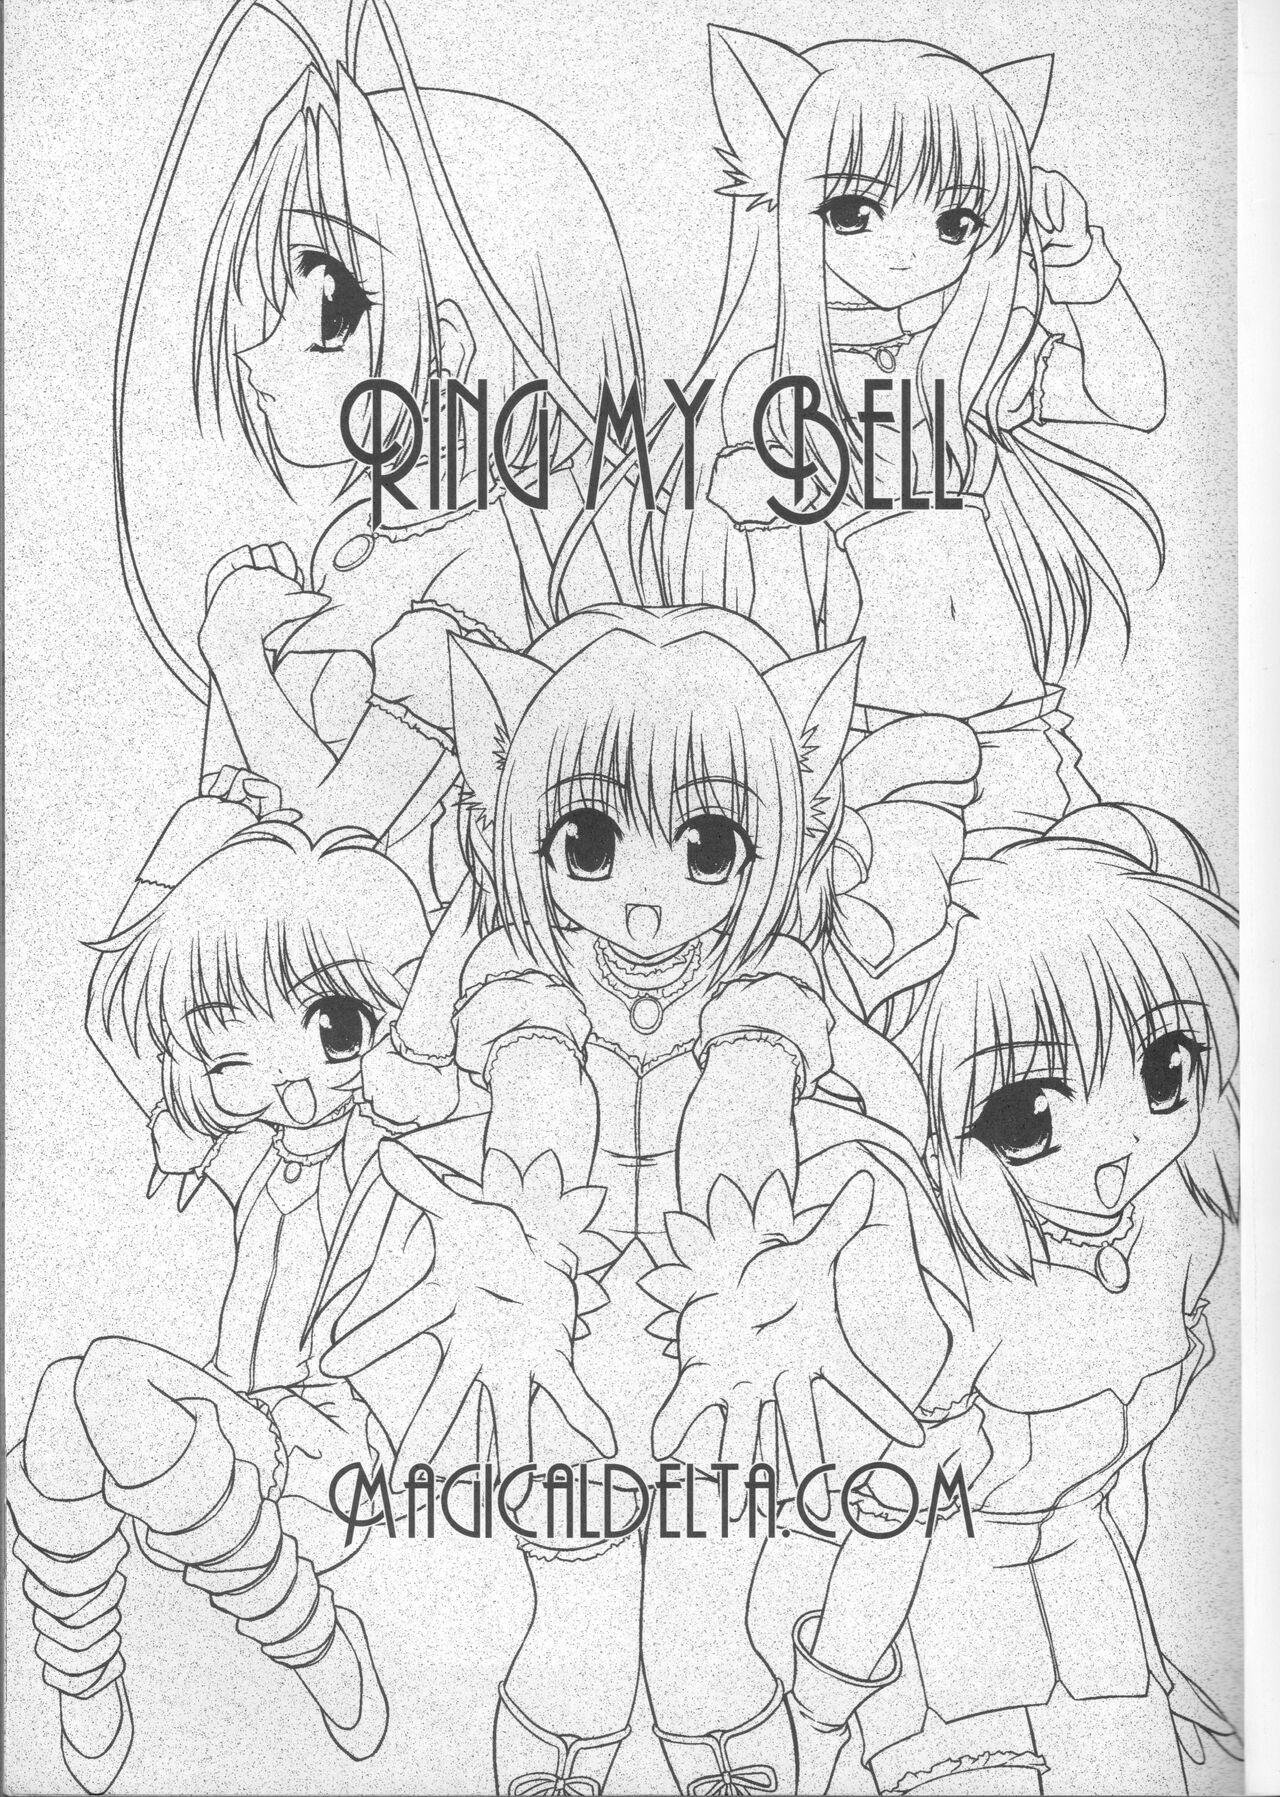 Bucetinha Ring My Bell - MAGICALDELTA.COM - Tokyo mew mew | mew mew power Mum - Picture 2